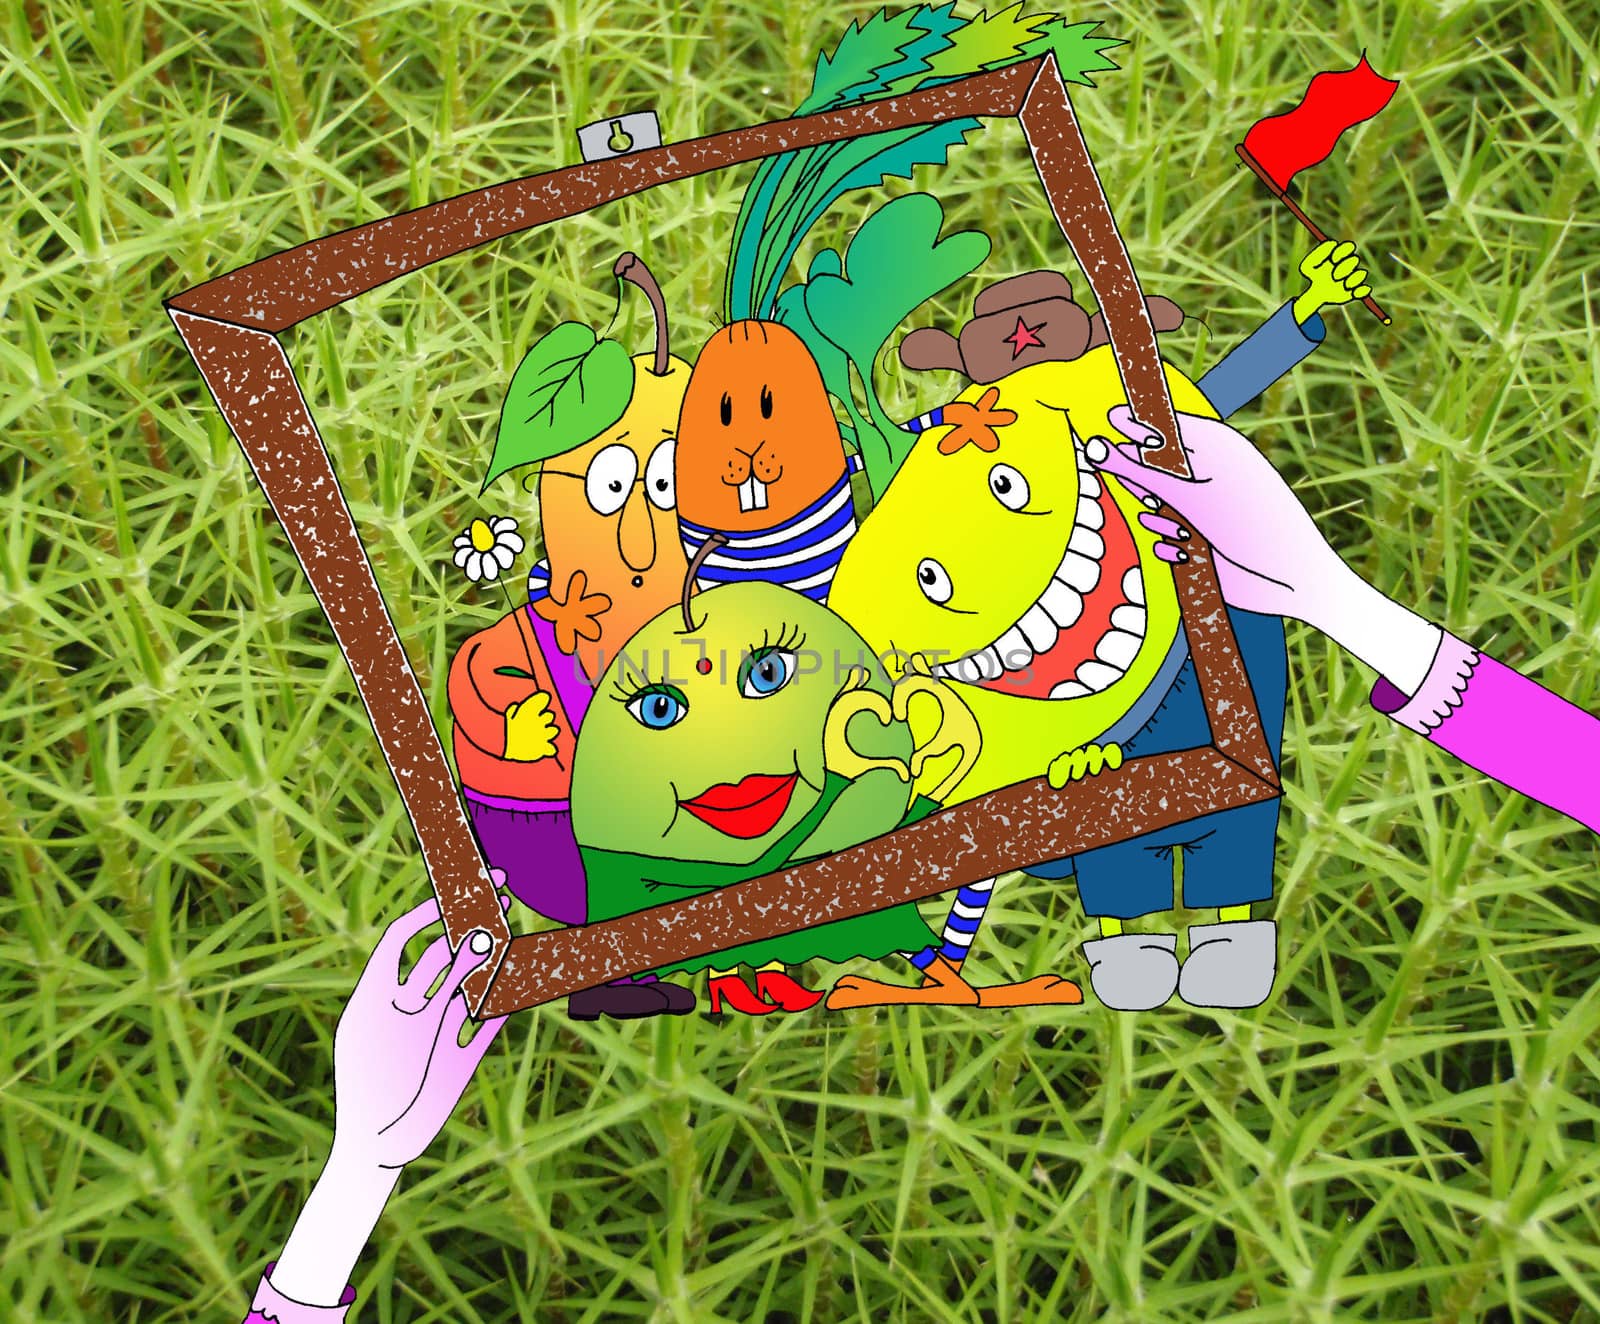 painted a picture of fruits and vegetables in the frame of the portrait.







painted a picture of the fruit in the frame of the portrait.